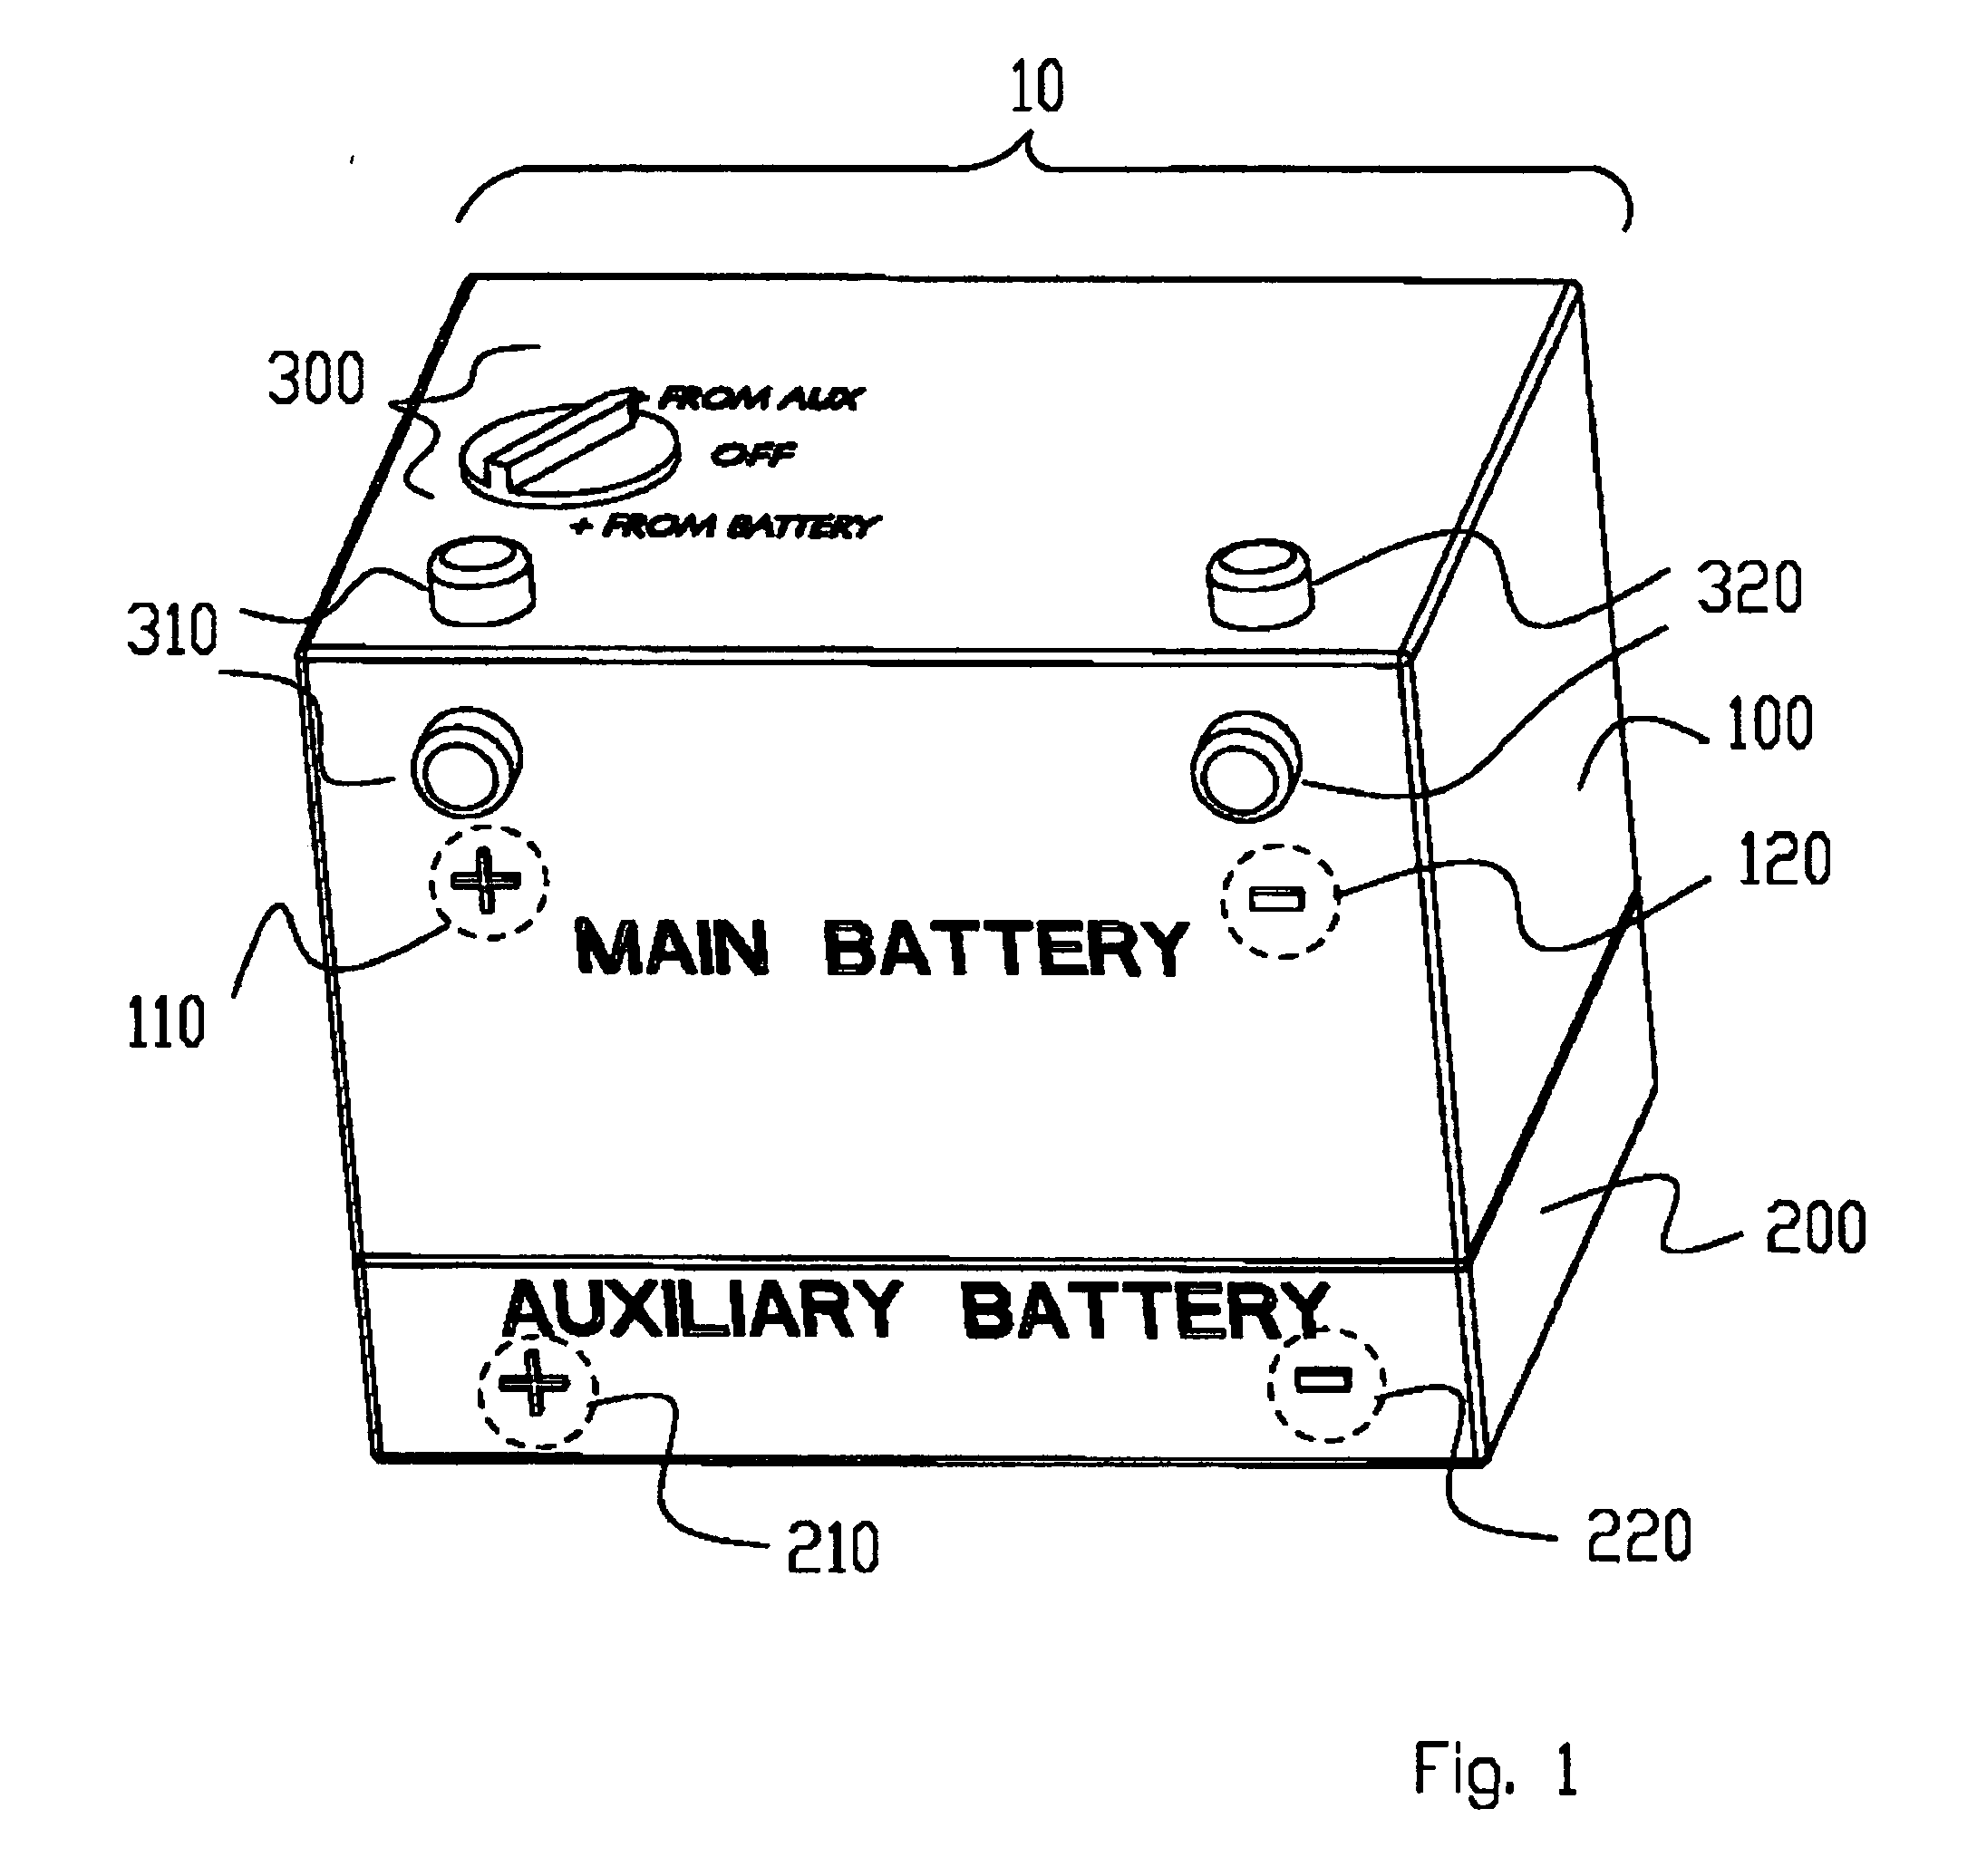 Multiple battery management system, auxiliary battery attachment system, and network controlled multiple battery system